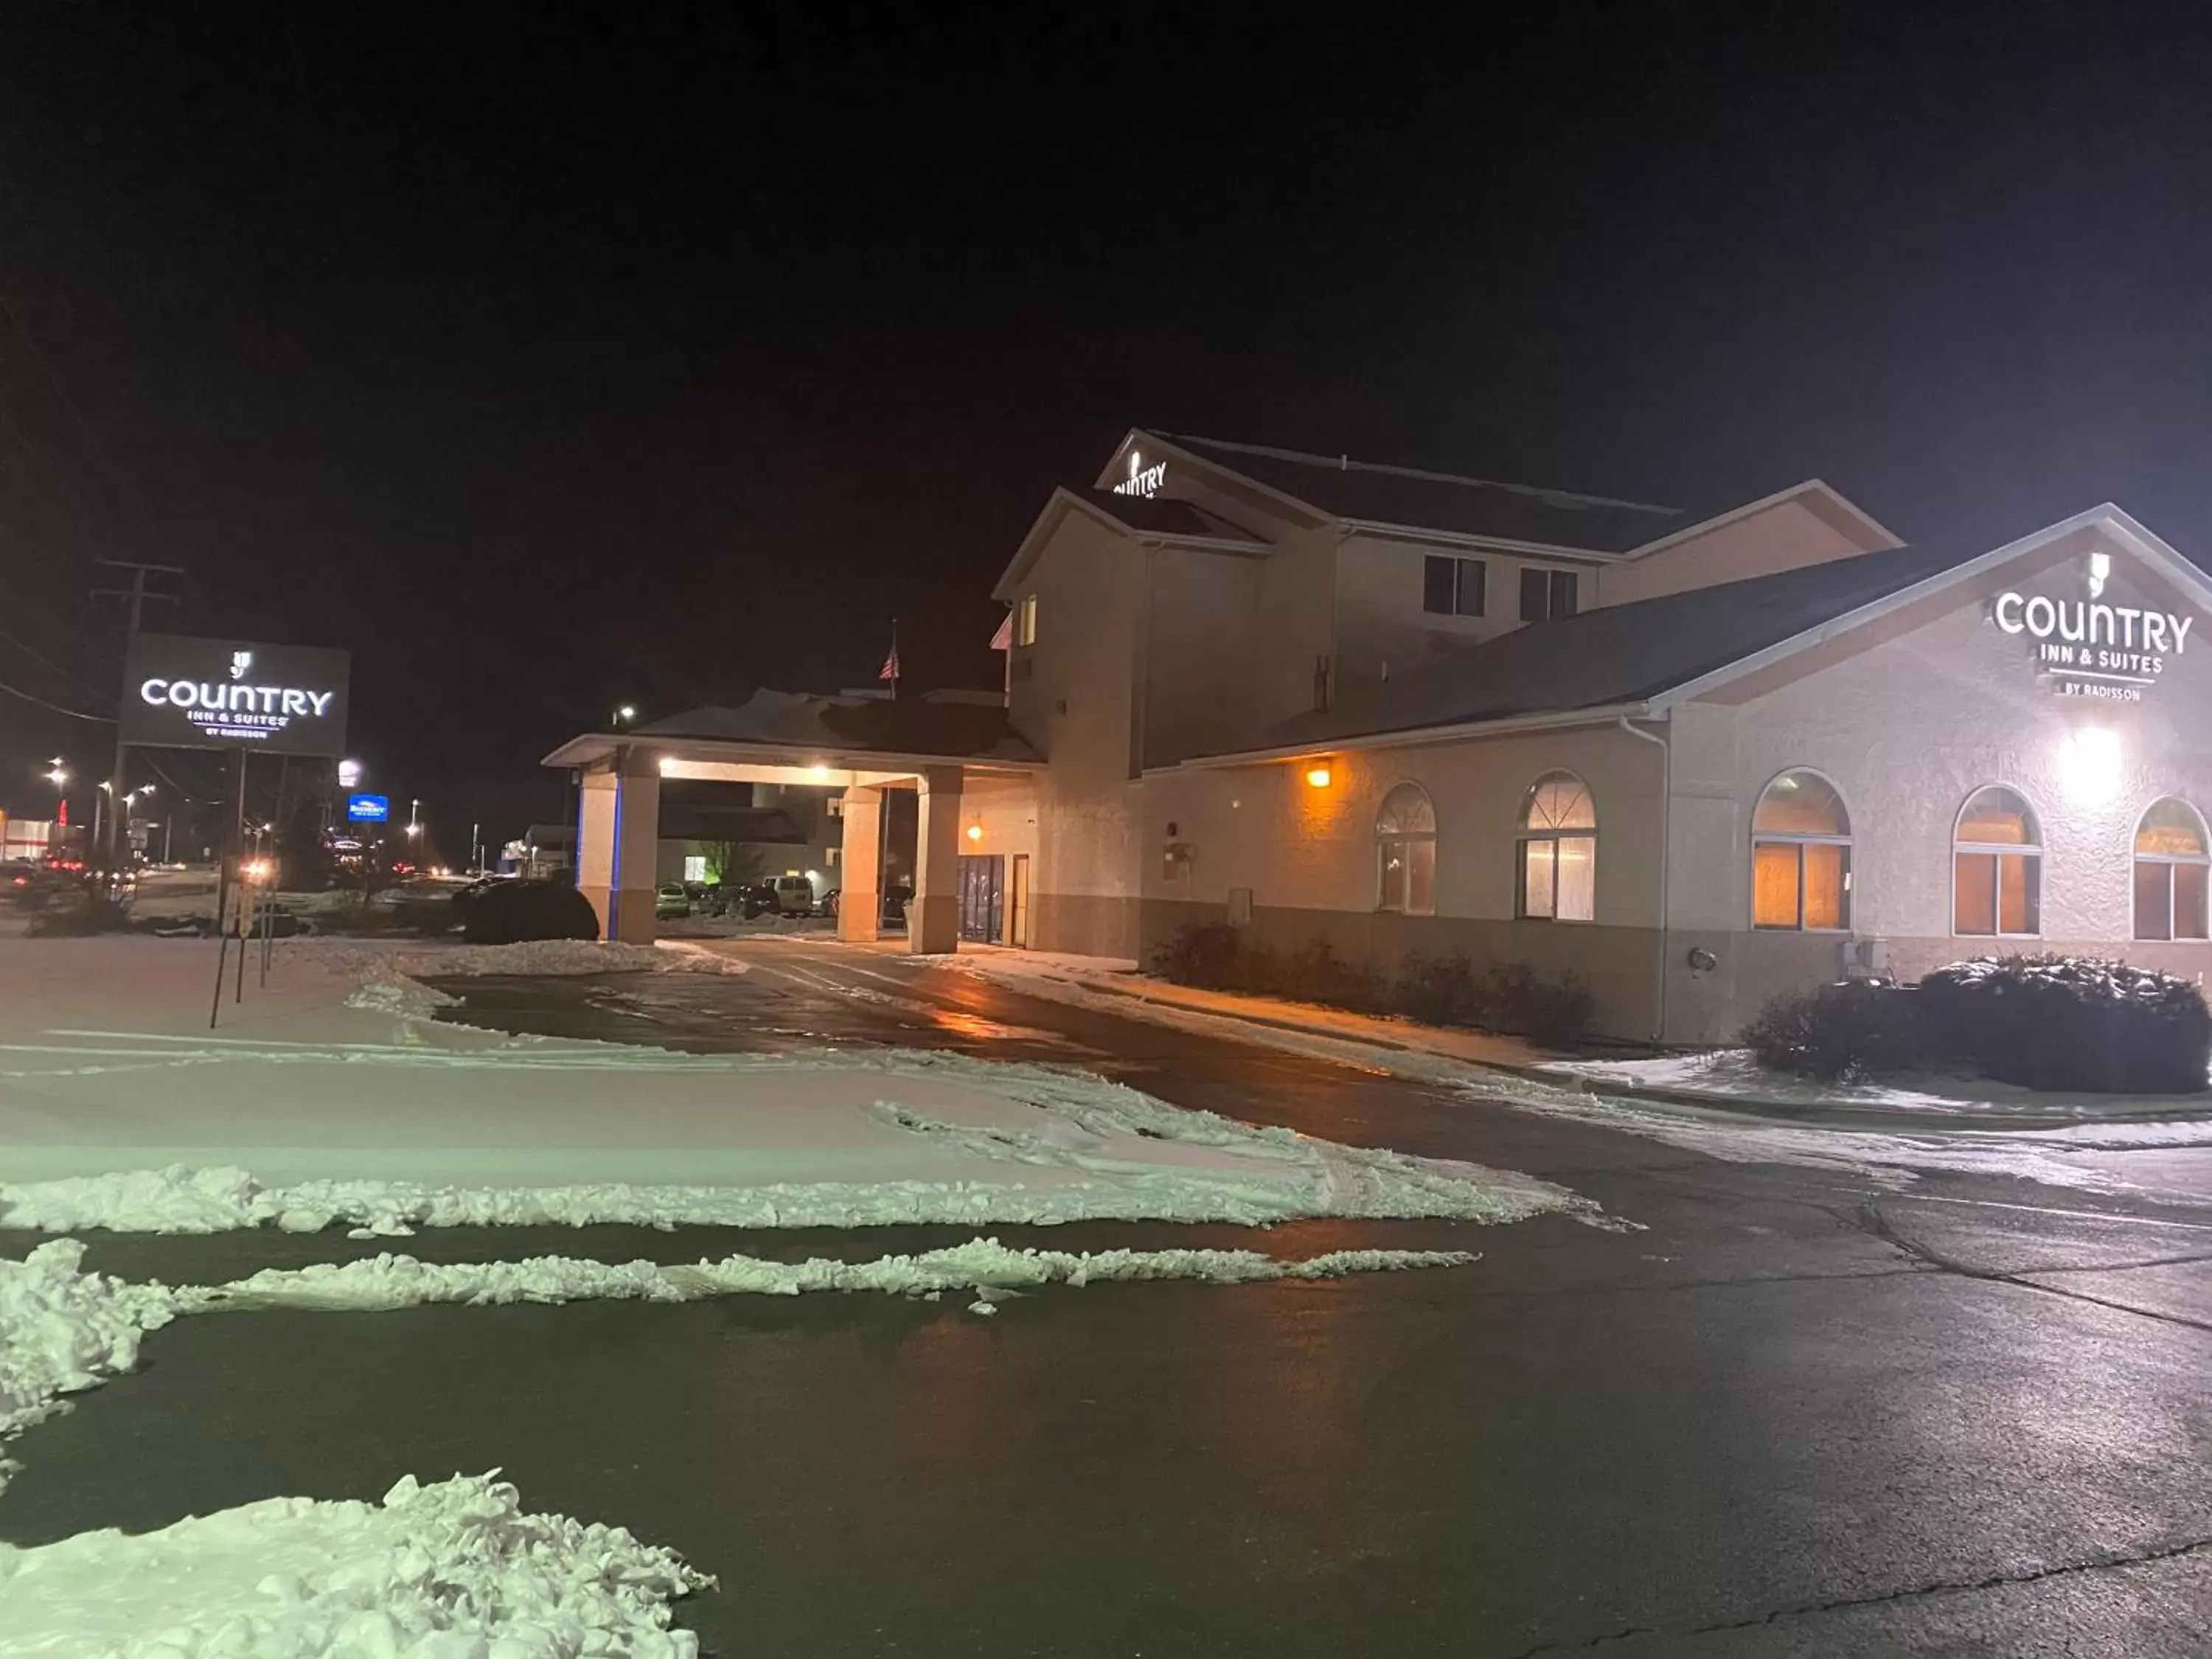 Property building, Winter in Country Inn & Suites by Radisson, Auburn, IN